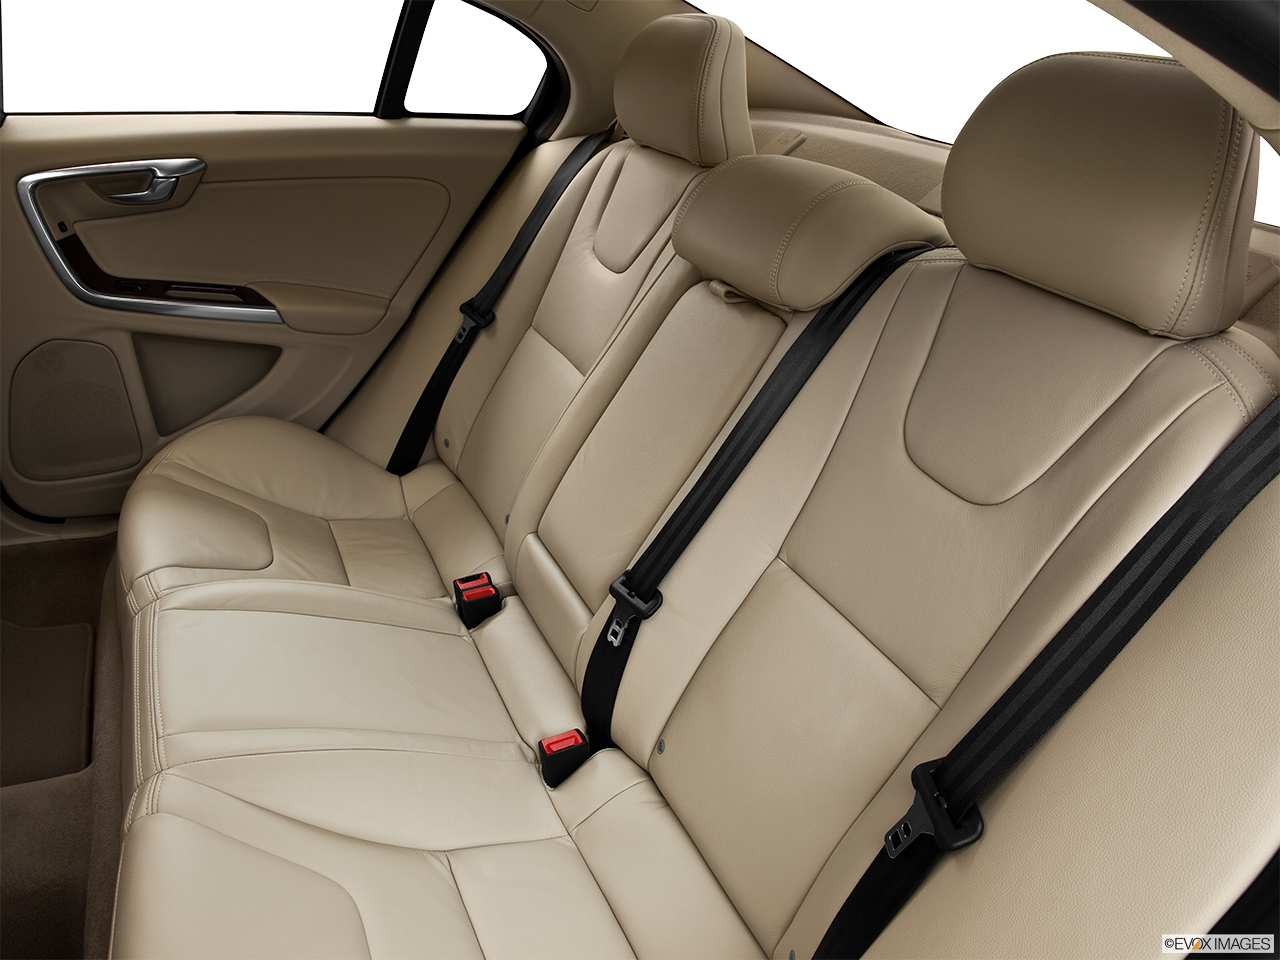 2013 Volvo S60 T5 FWD Premier Rear seats from Drivers Side. 